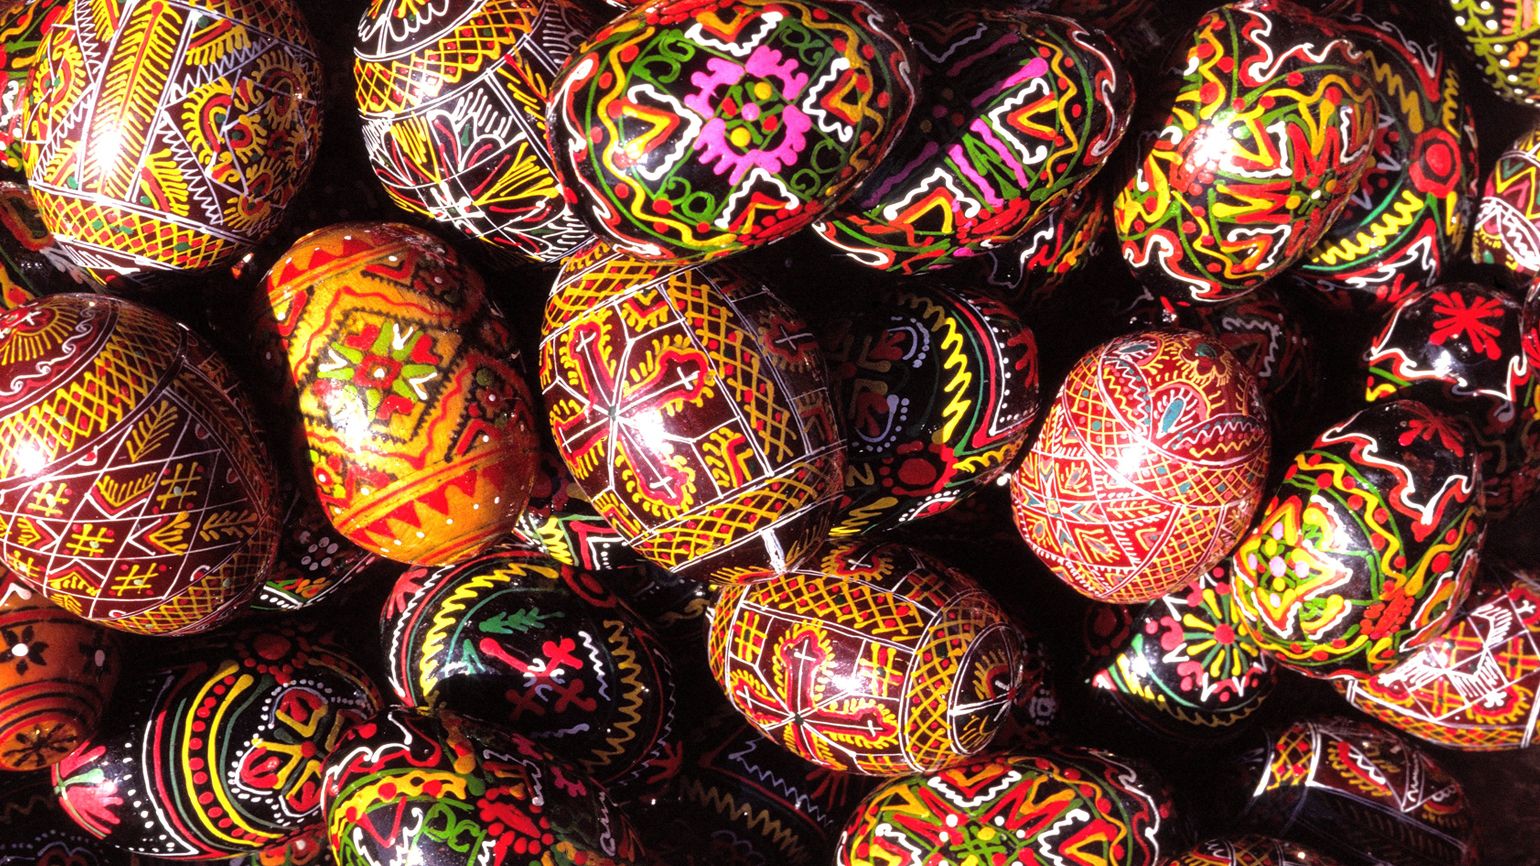 A collection of intricately patterned eggs from Athens, Greece